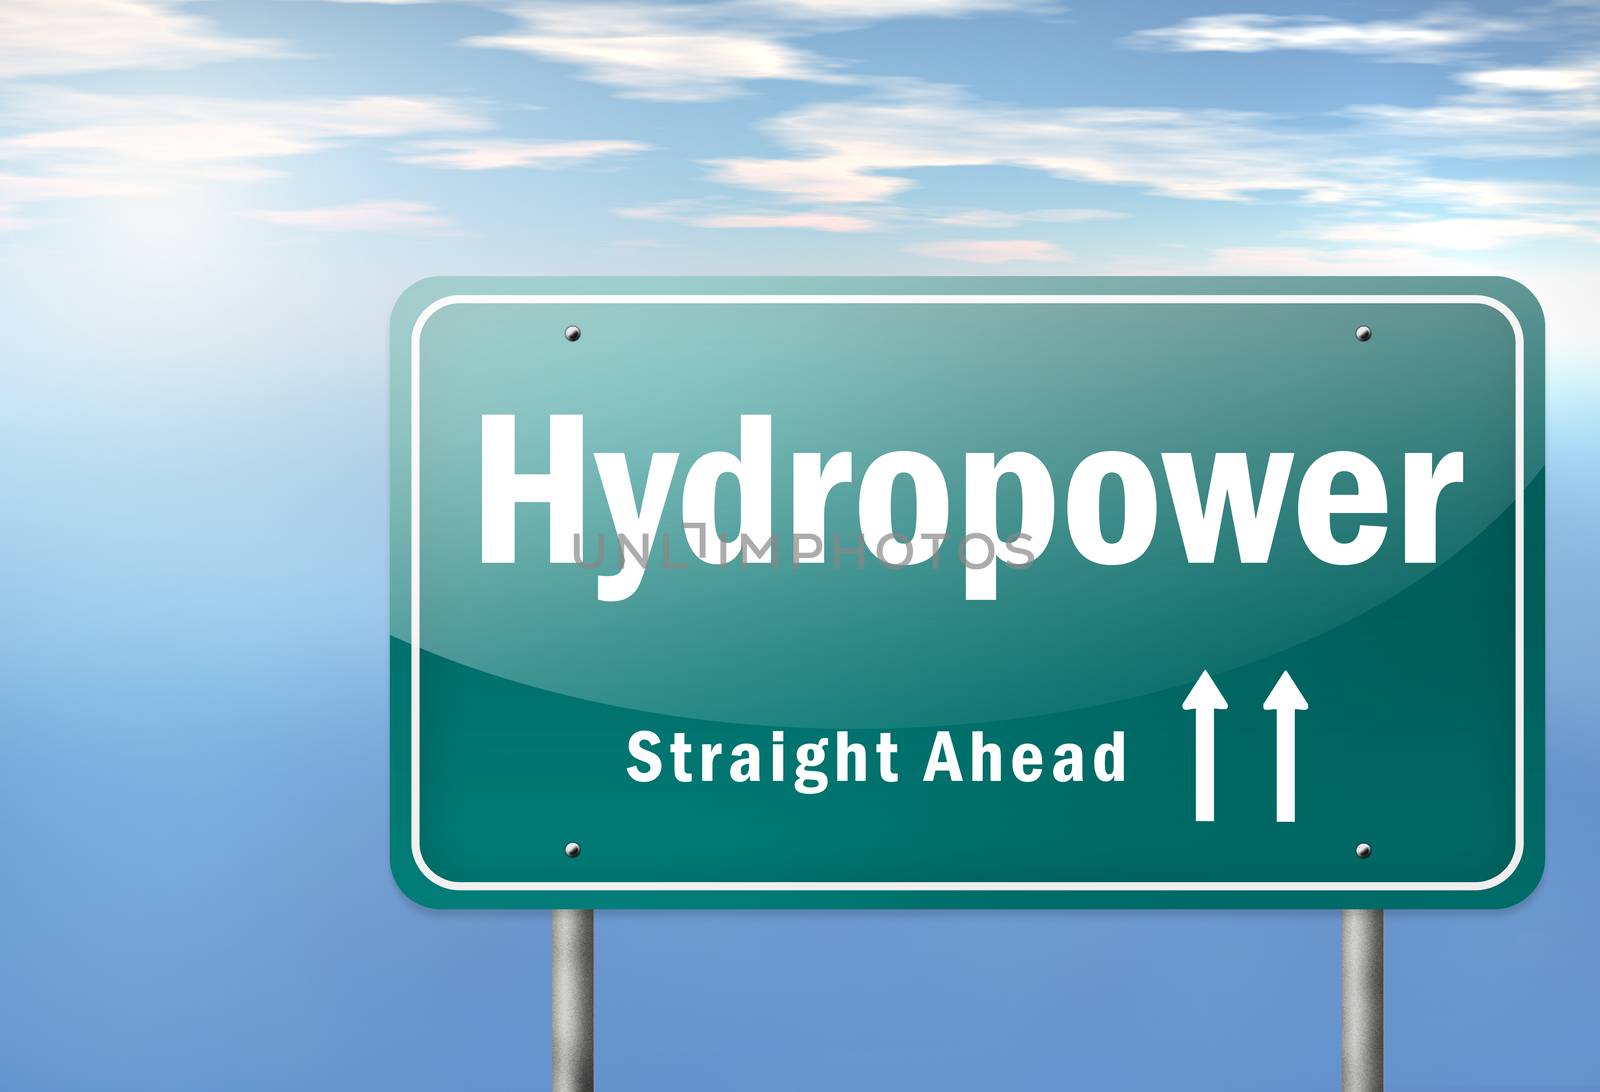 Highway Signpost with Hydropower wording